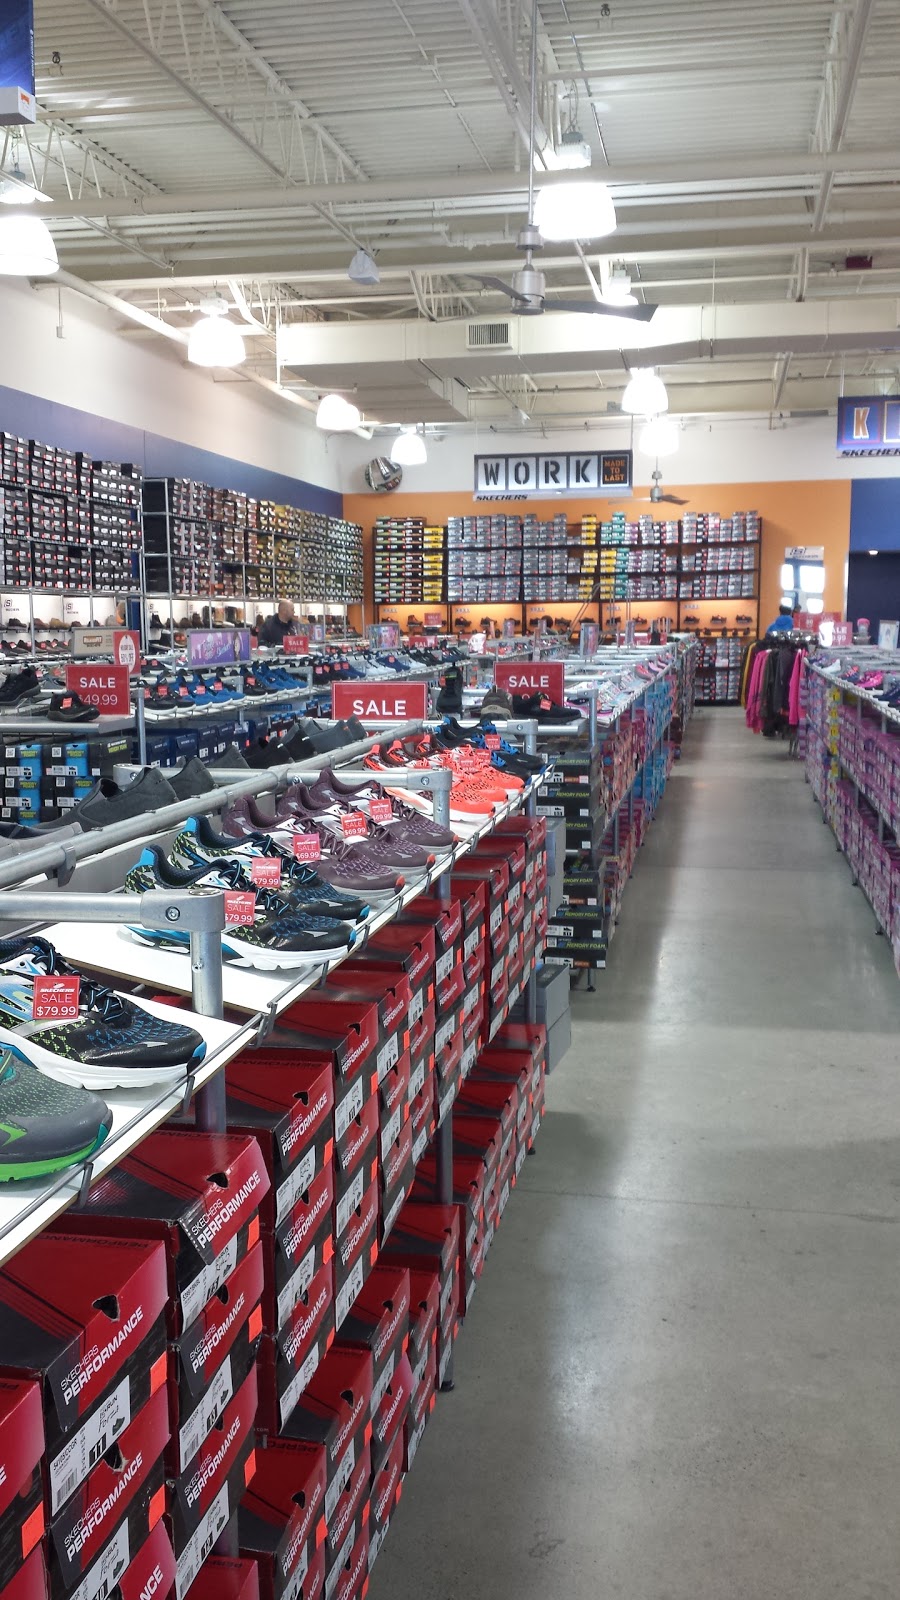 skechers calgary outlet